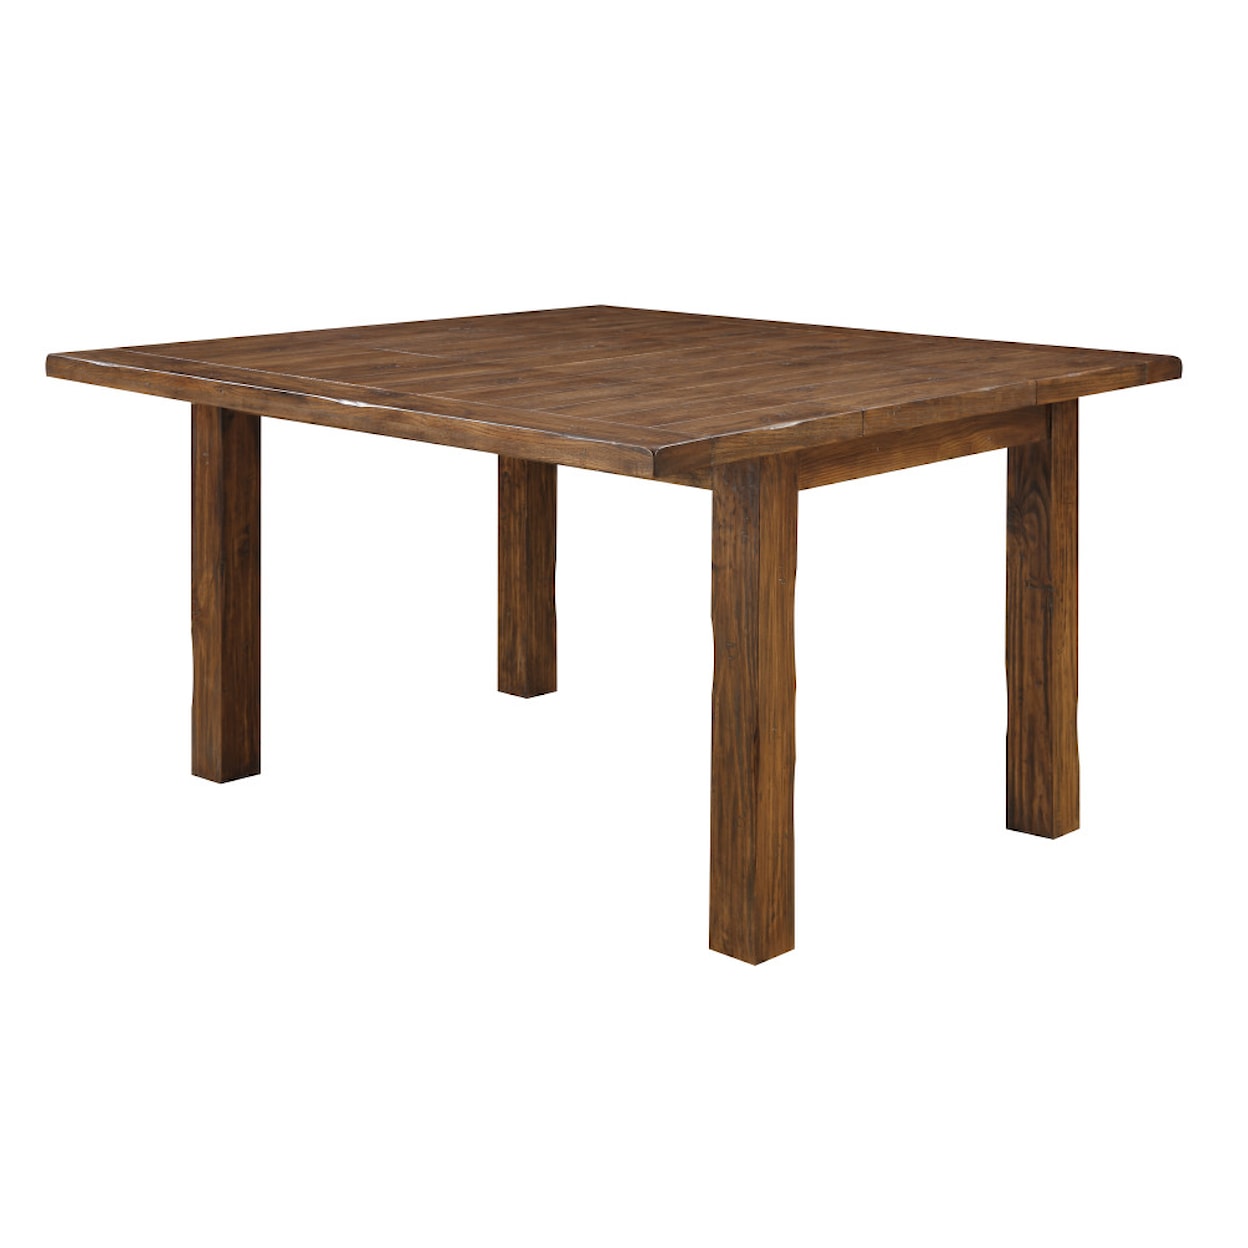 Emerald Chambers Creek Counter-Height Dining Table with Leaf